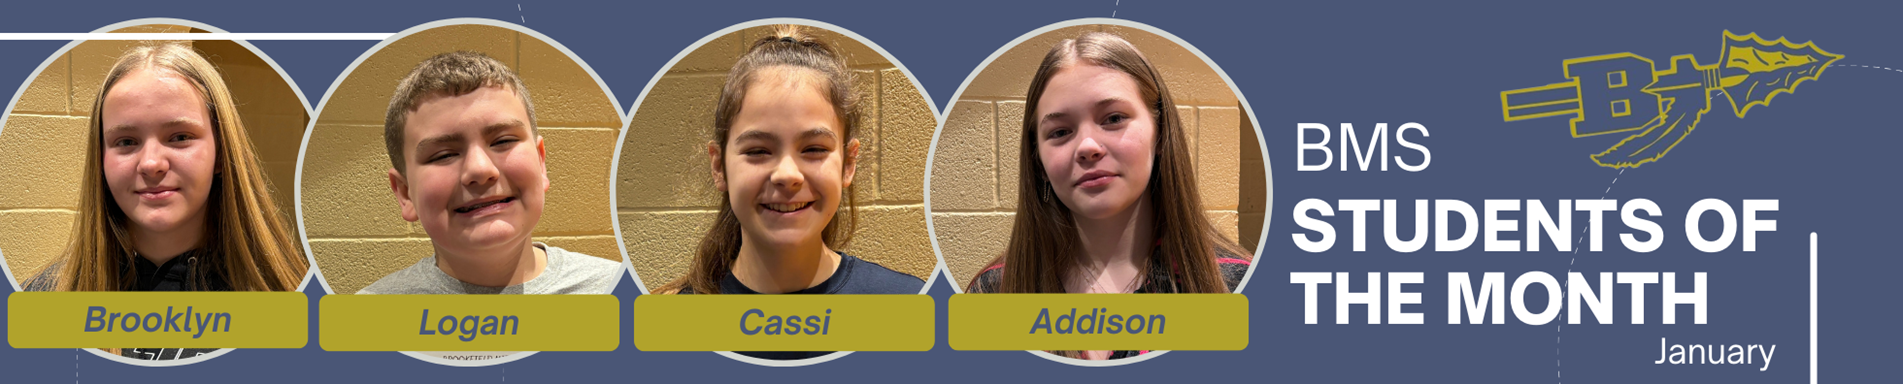 BMS Students of the Month - January